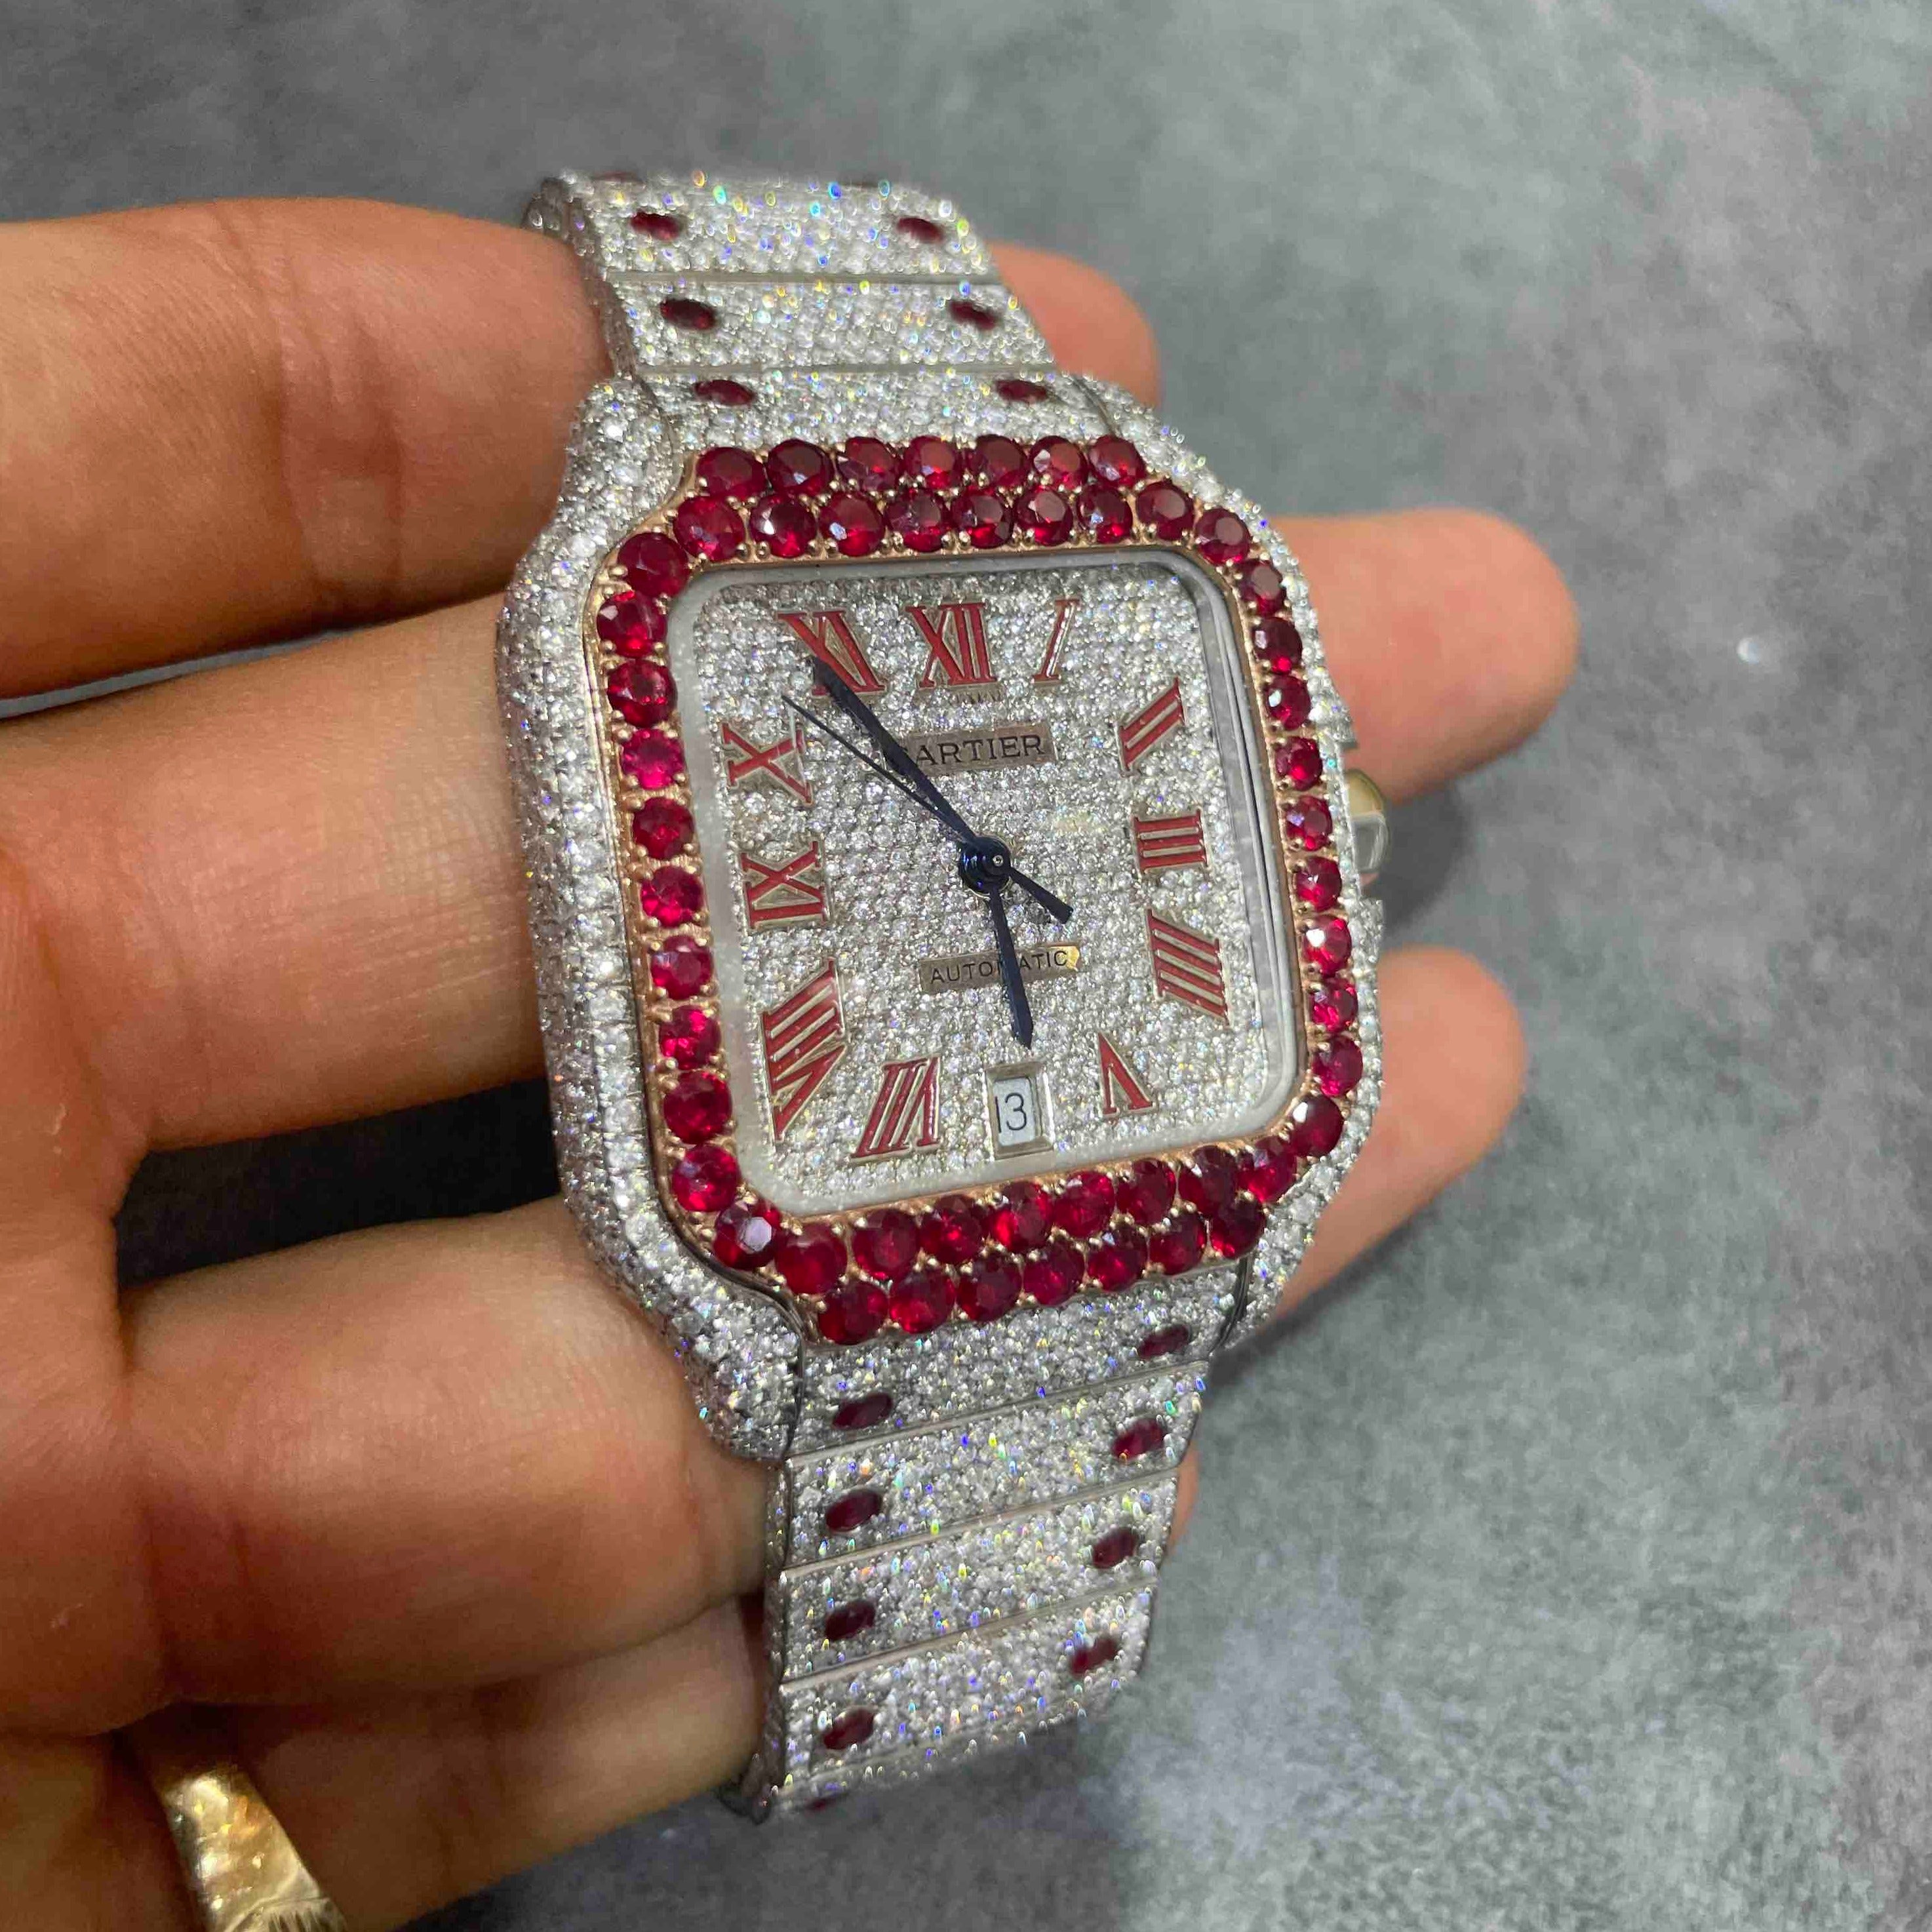 41mm RUBY ICED OUT CARTIER WATCH 